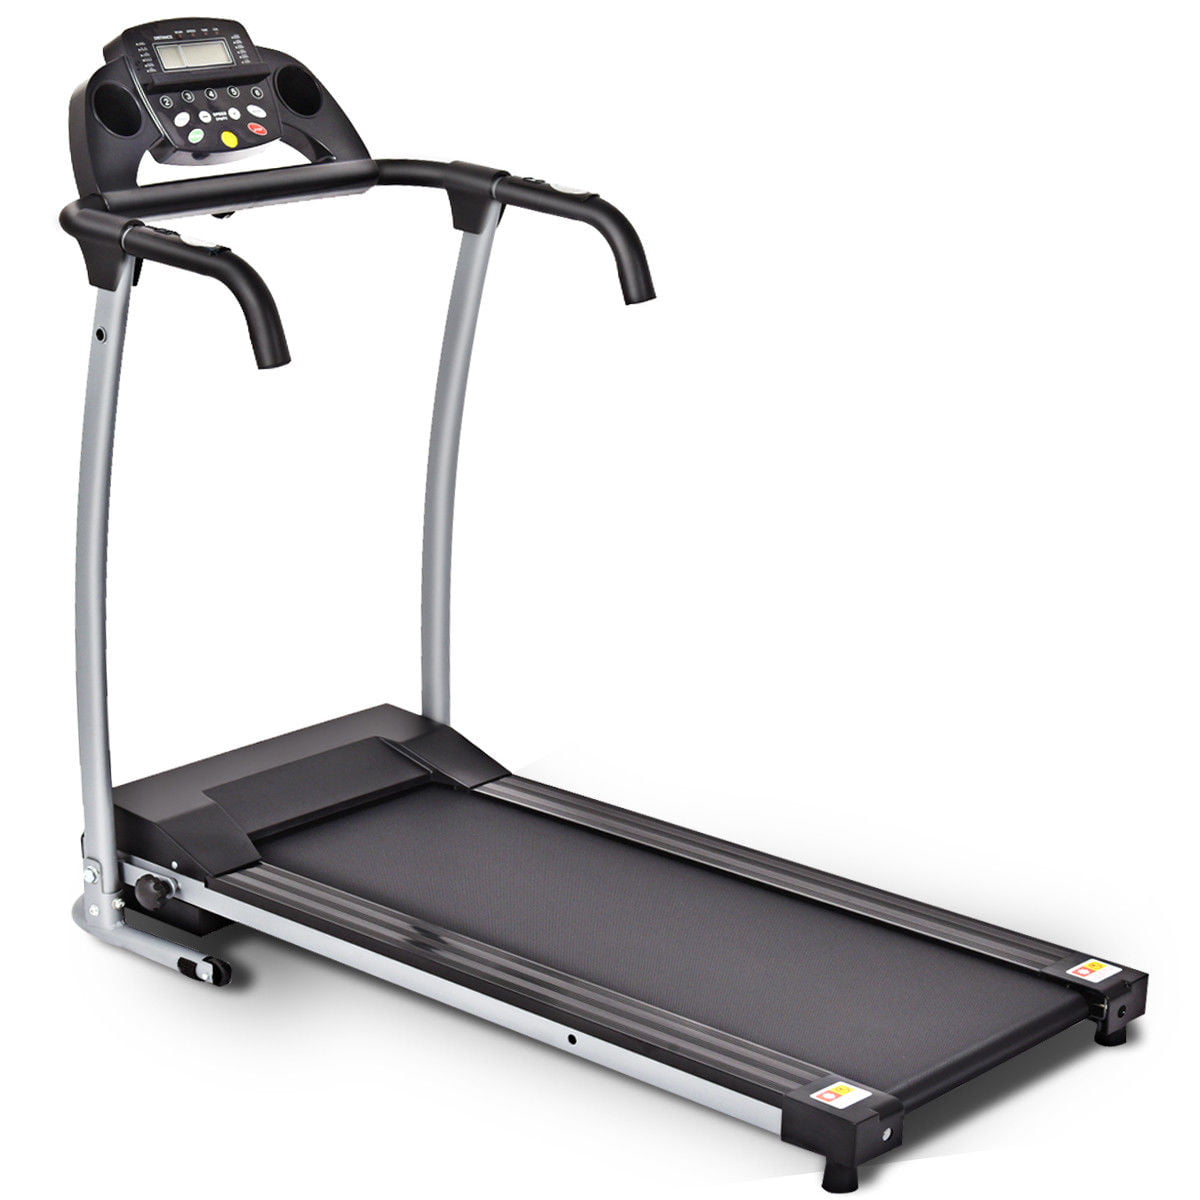 Costway 800W Folding Treadmill Electric Portable Motorized Power Running Fitness Machine w/support on Waltrack